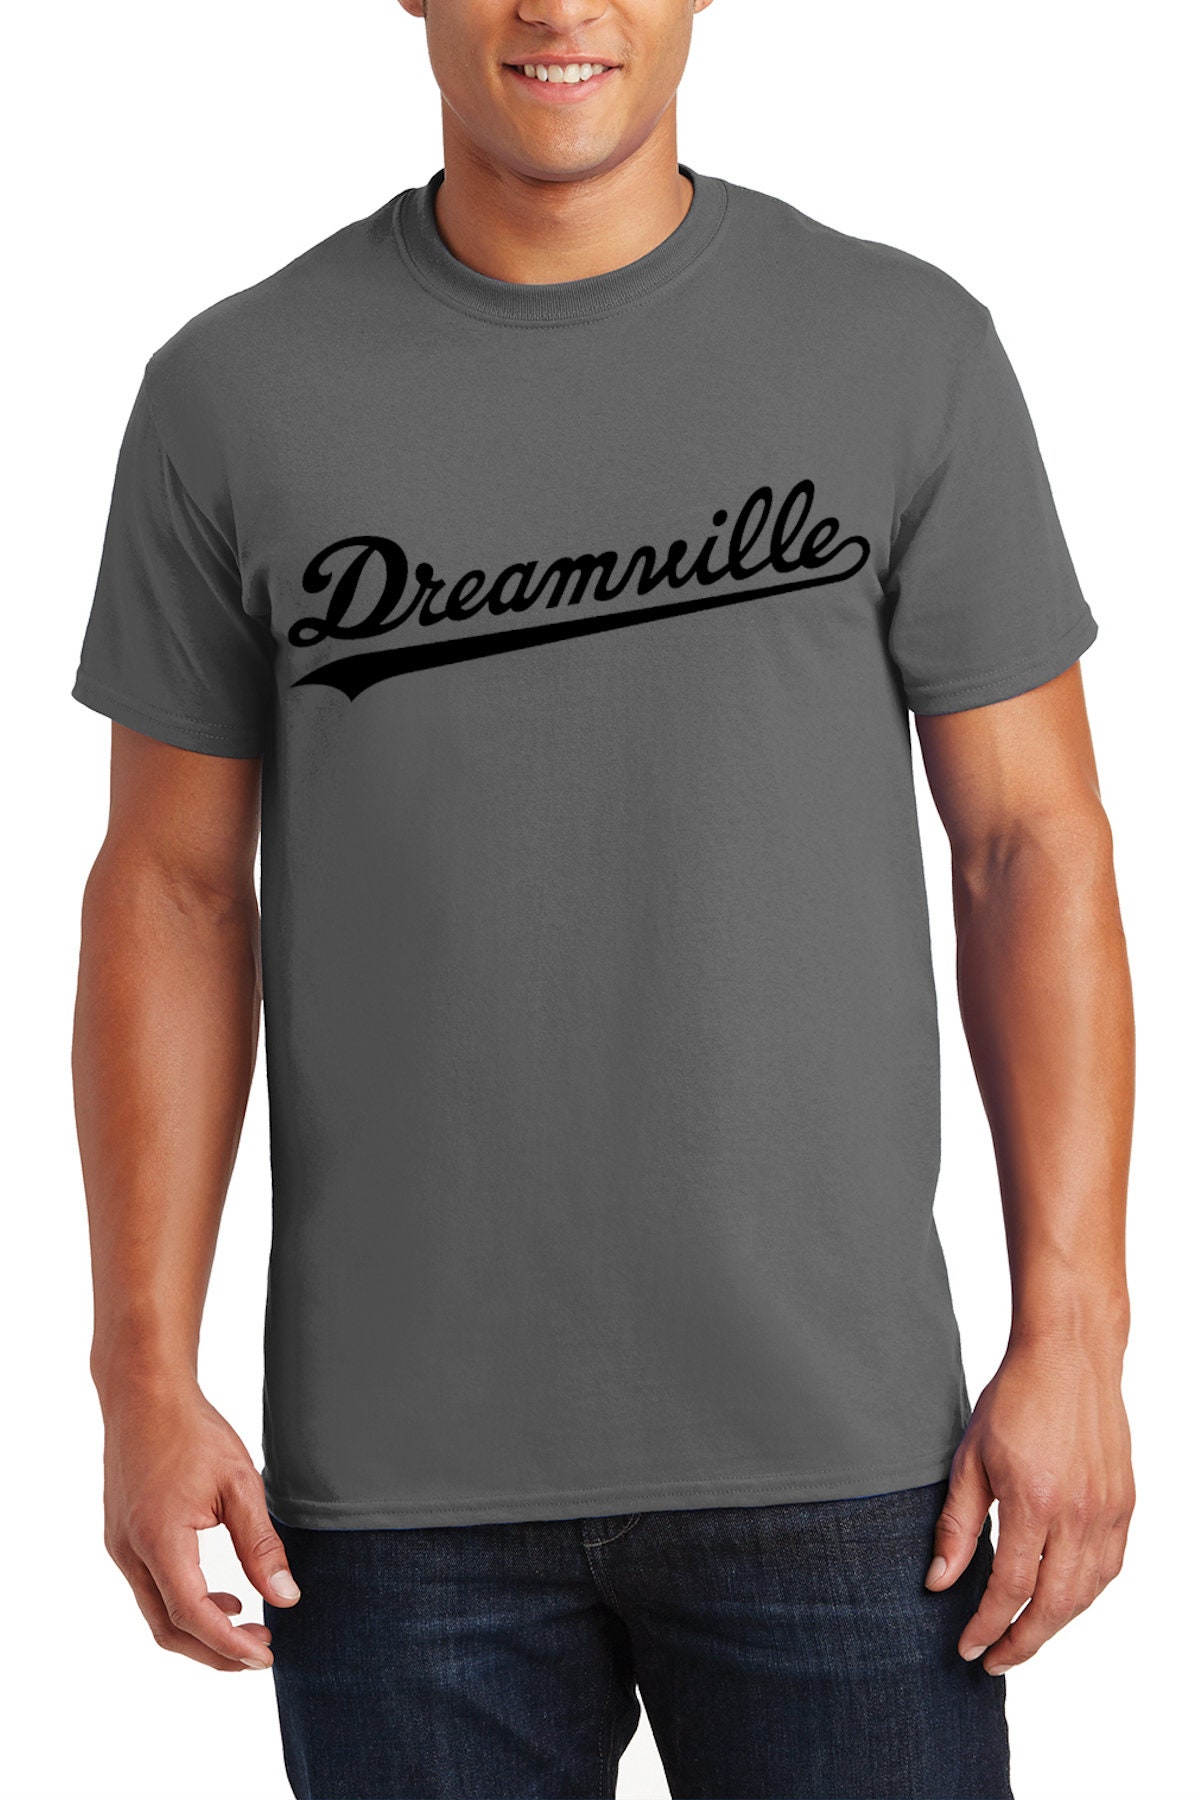 Inspired By J Cole 4 Your Eyez Only Dreamville T Shirt Hip Hop Rap Limited Tour